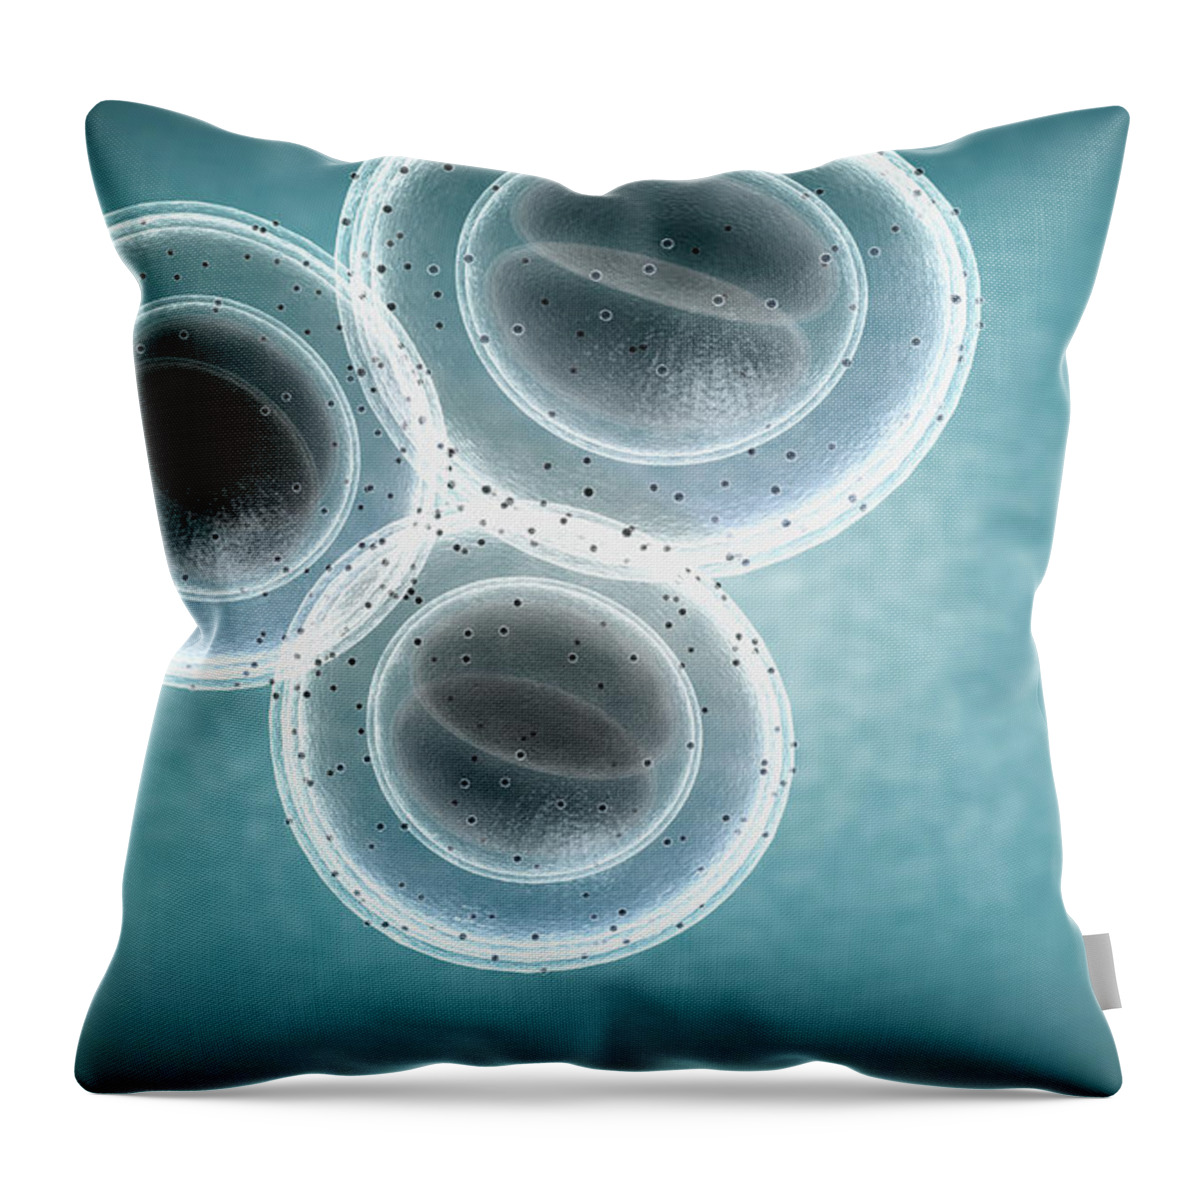 Antibiotic Resistant Throw Pillow featuring the digital art The Structure Of Mrsa by Medicalrf.com